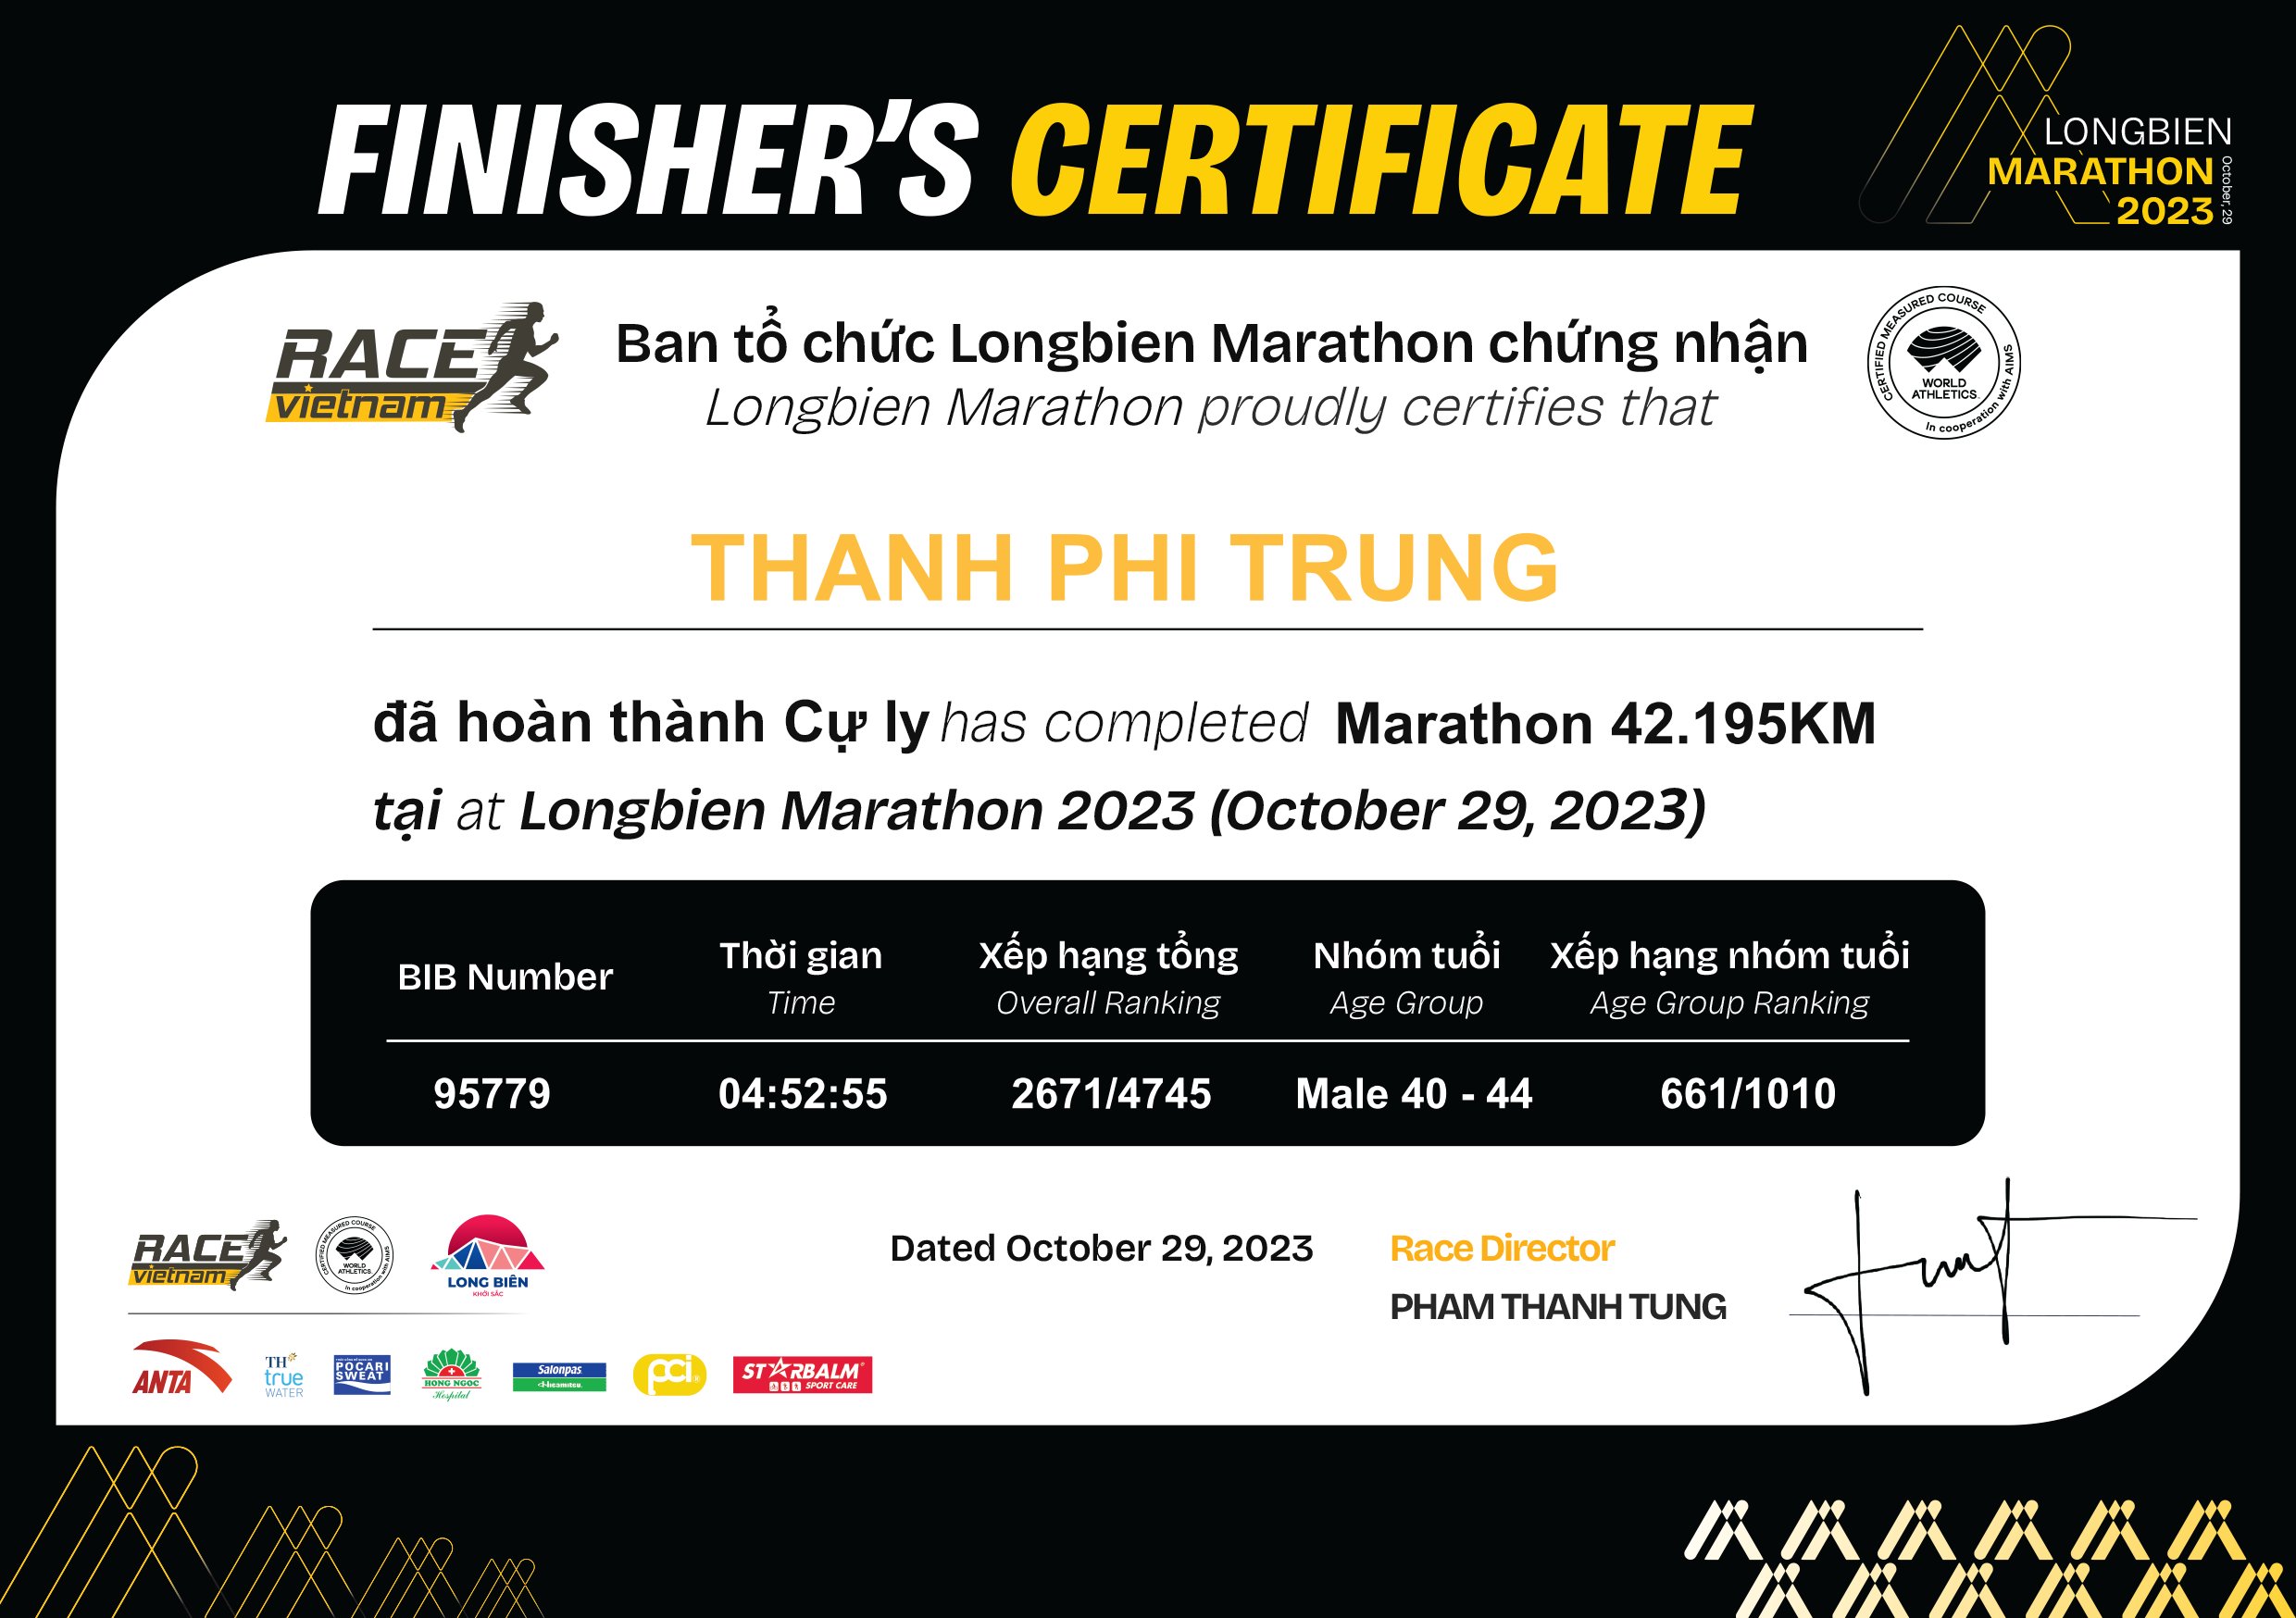 95779 - Thanh Phi Trung